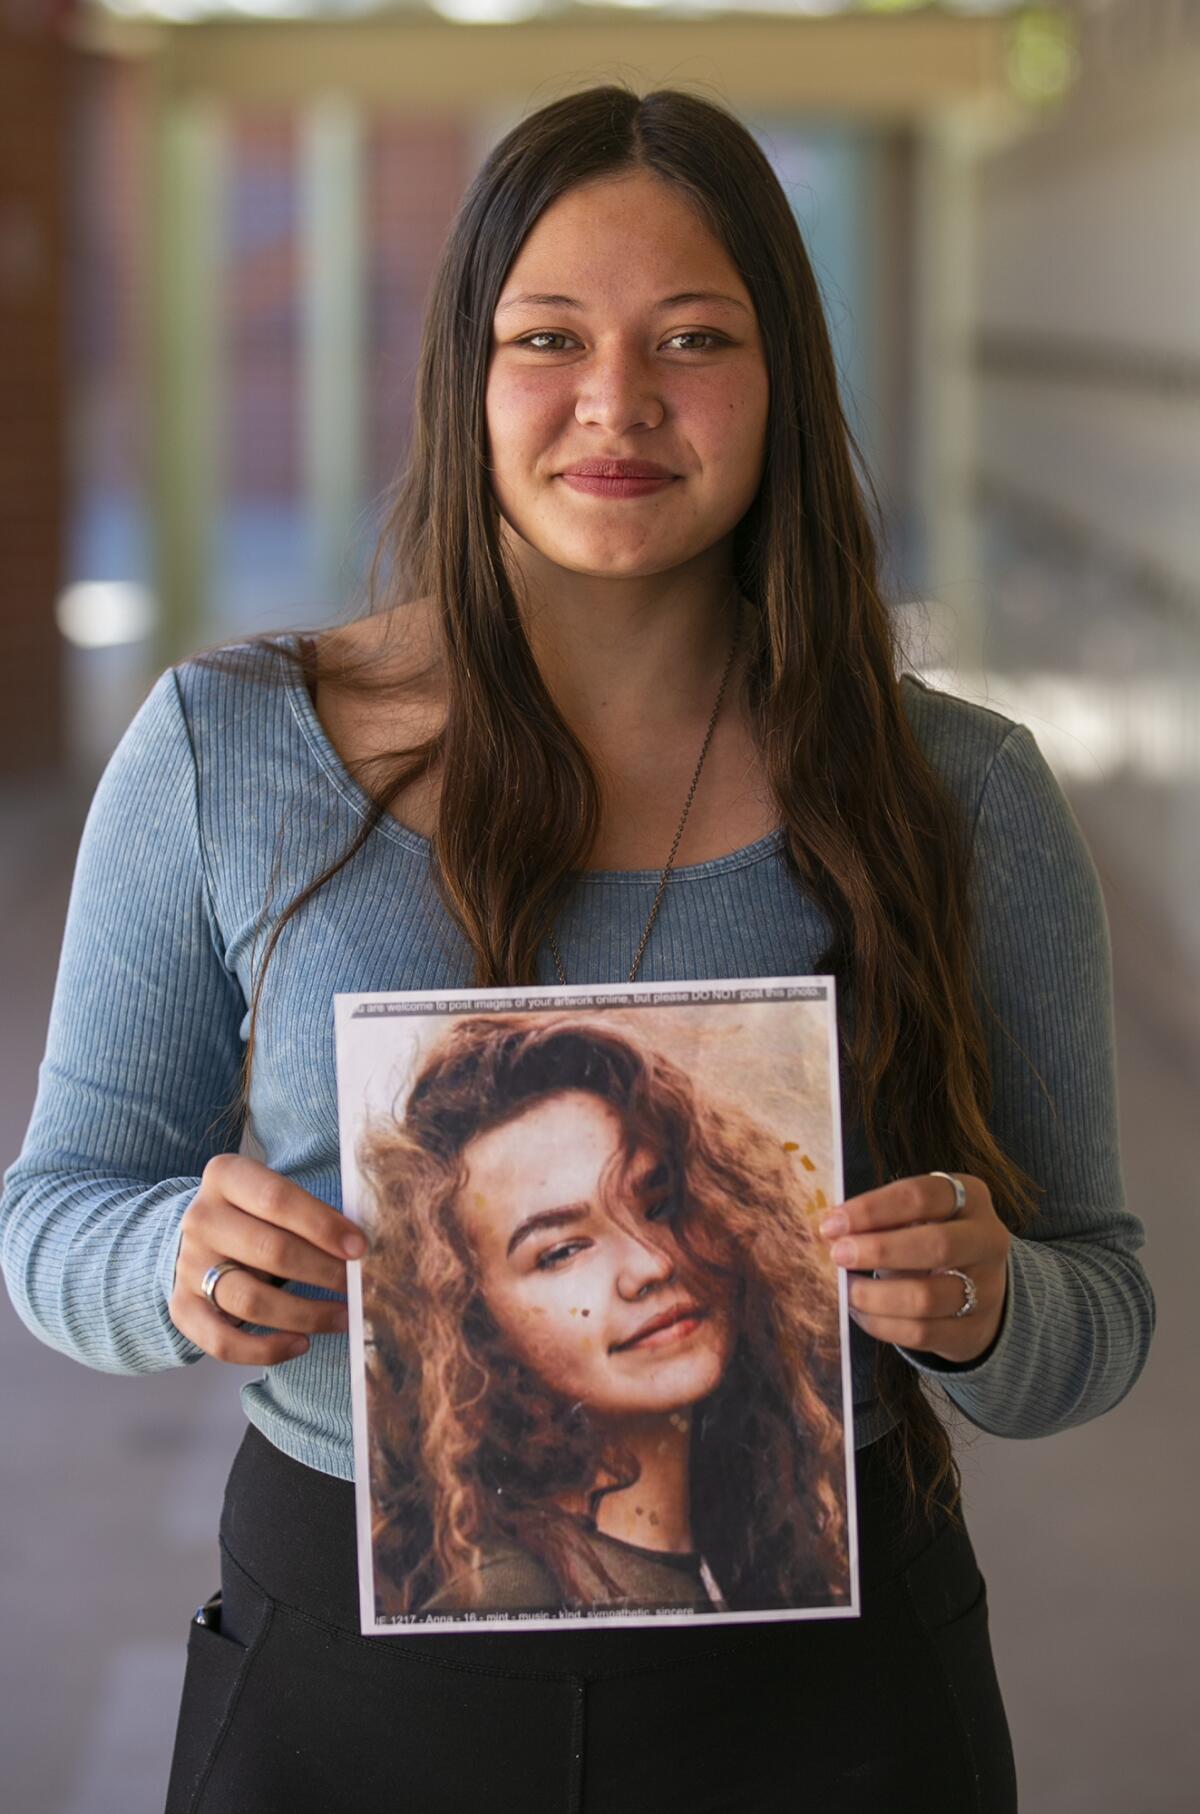 Costa Mesa student Dharma Andreas, 18, with a picture of the student she painted Anna.